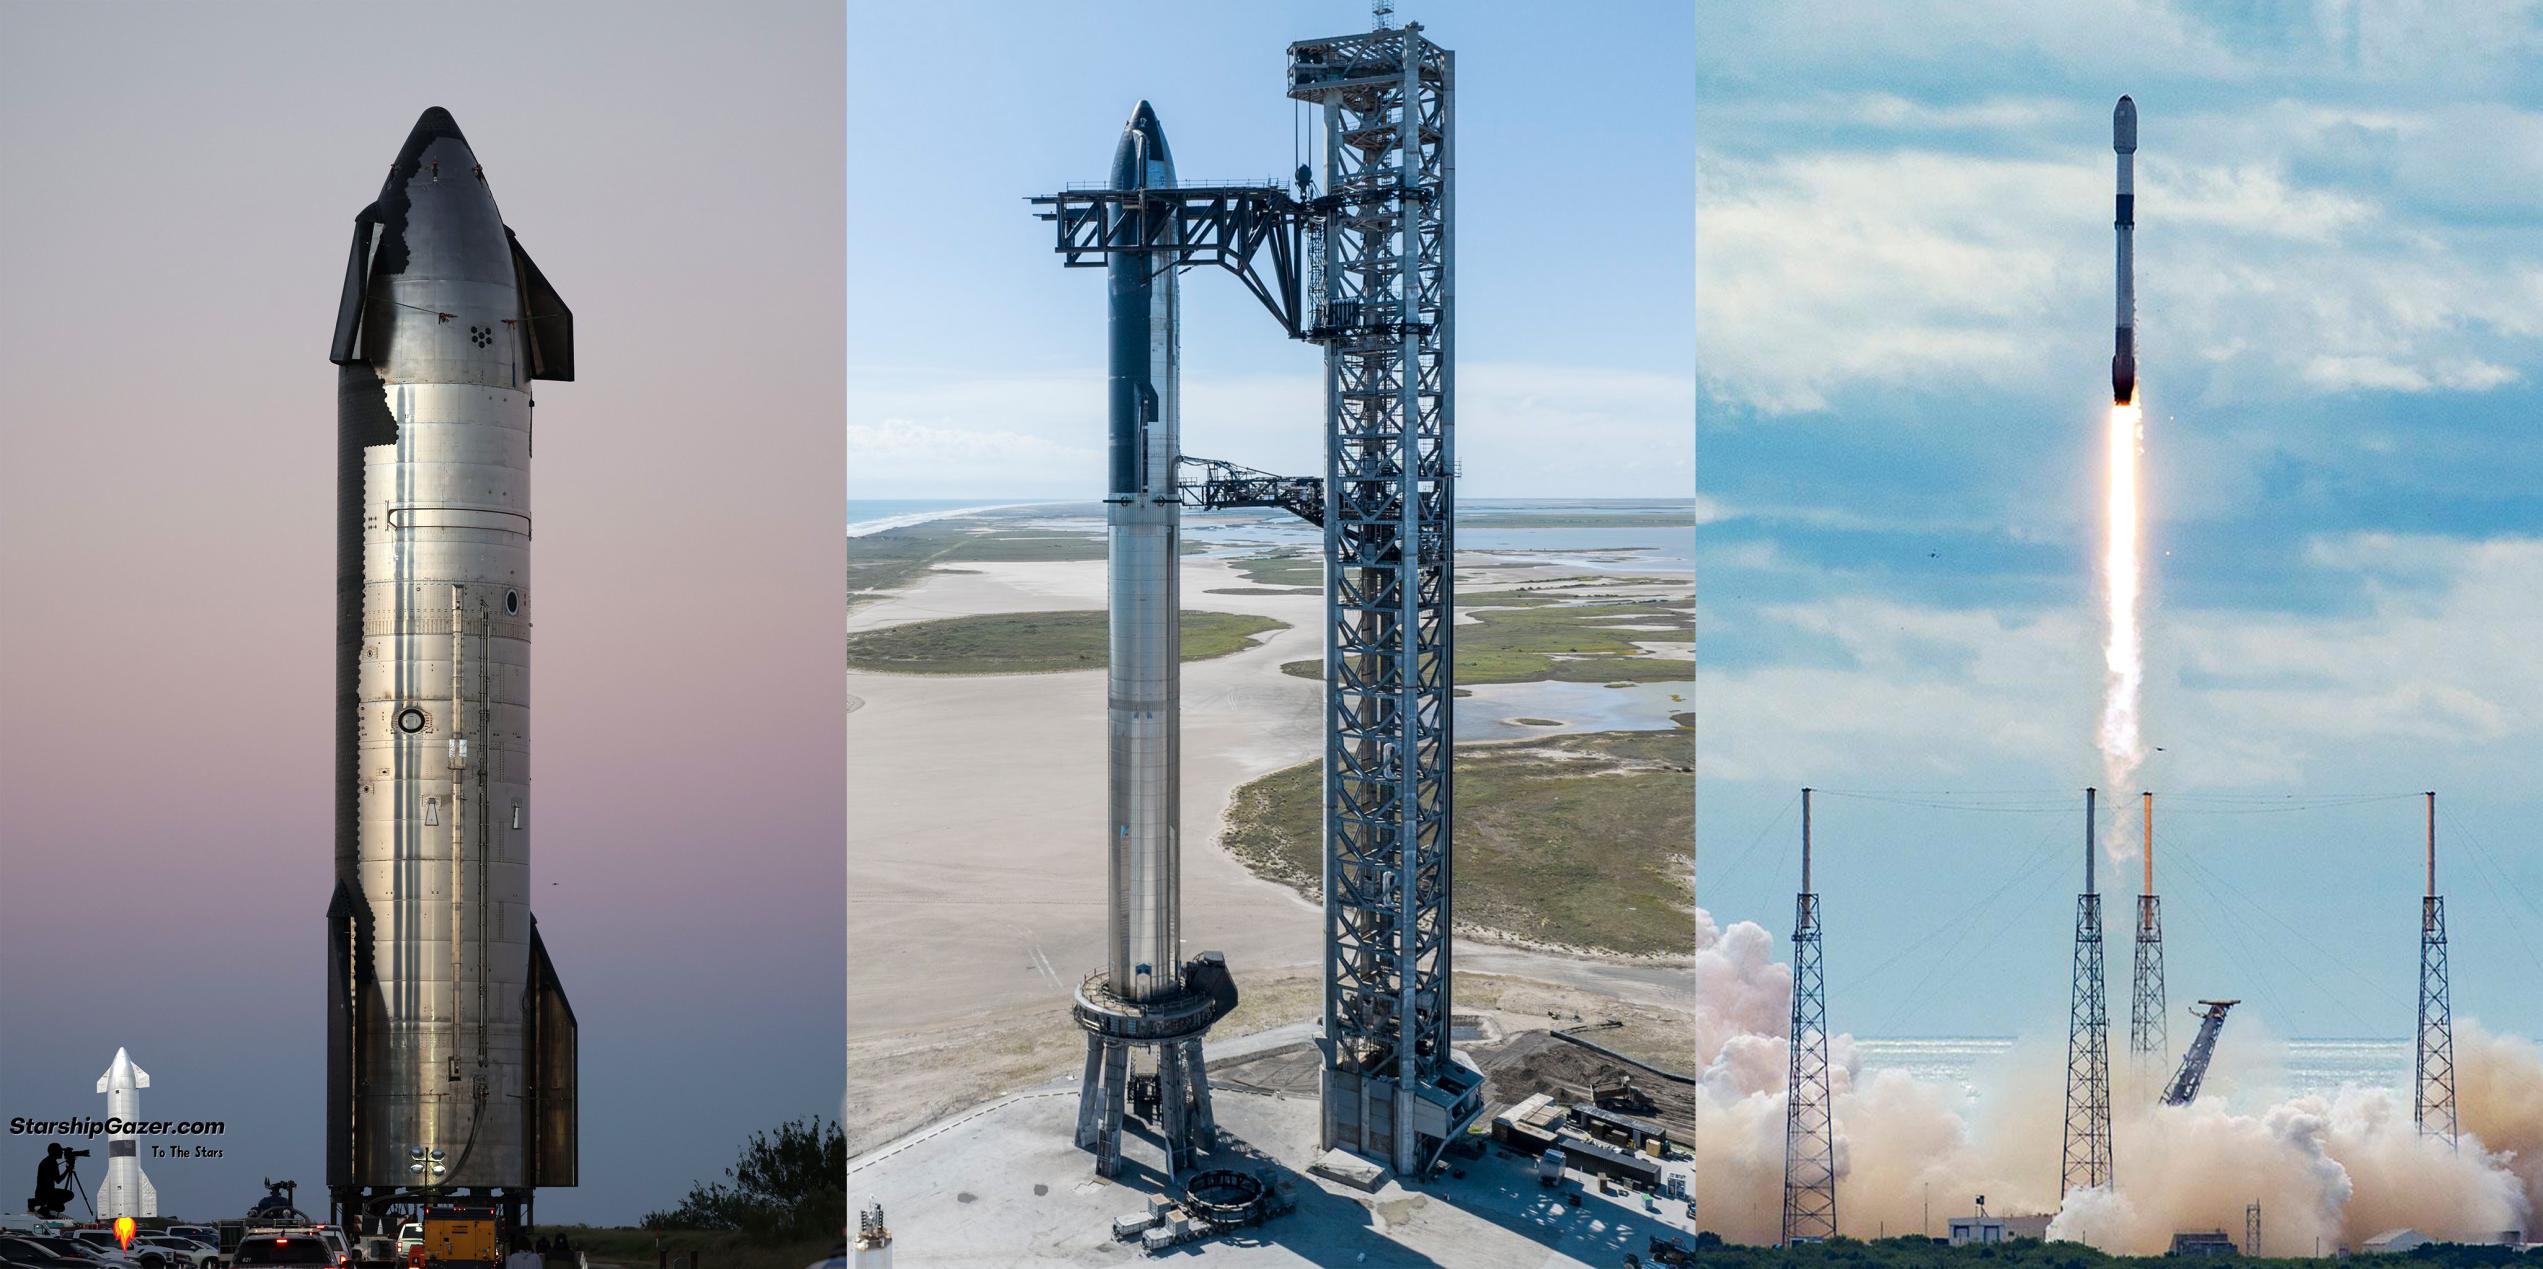 S25 rollout 101922 (Starship Gazer) + B4 S24 stack 101222 + Starlink 4-36 (SpaceX) (c)